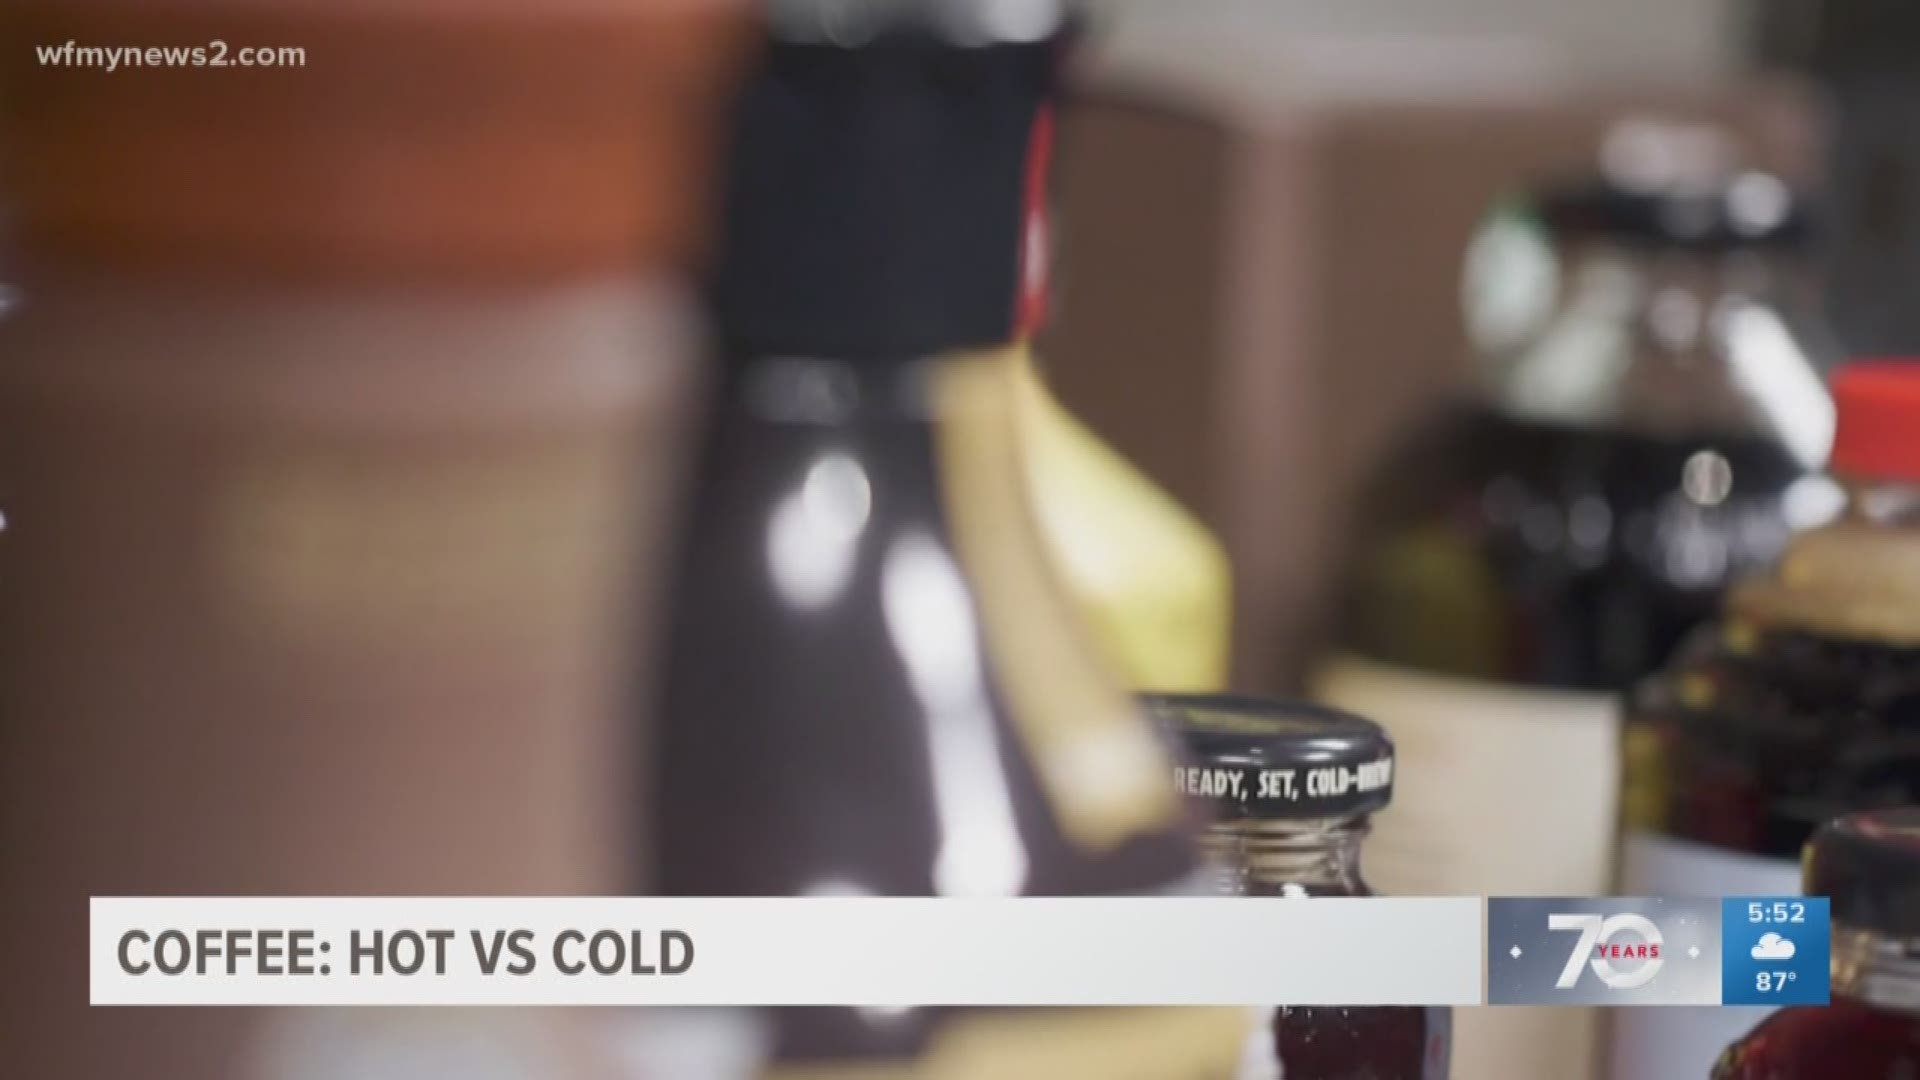 You probably don't feel like a hot cup of coffee right now. But is that cold cup healthy?